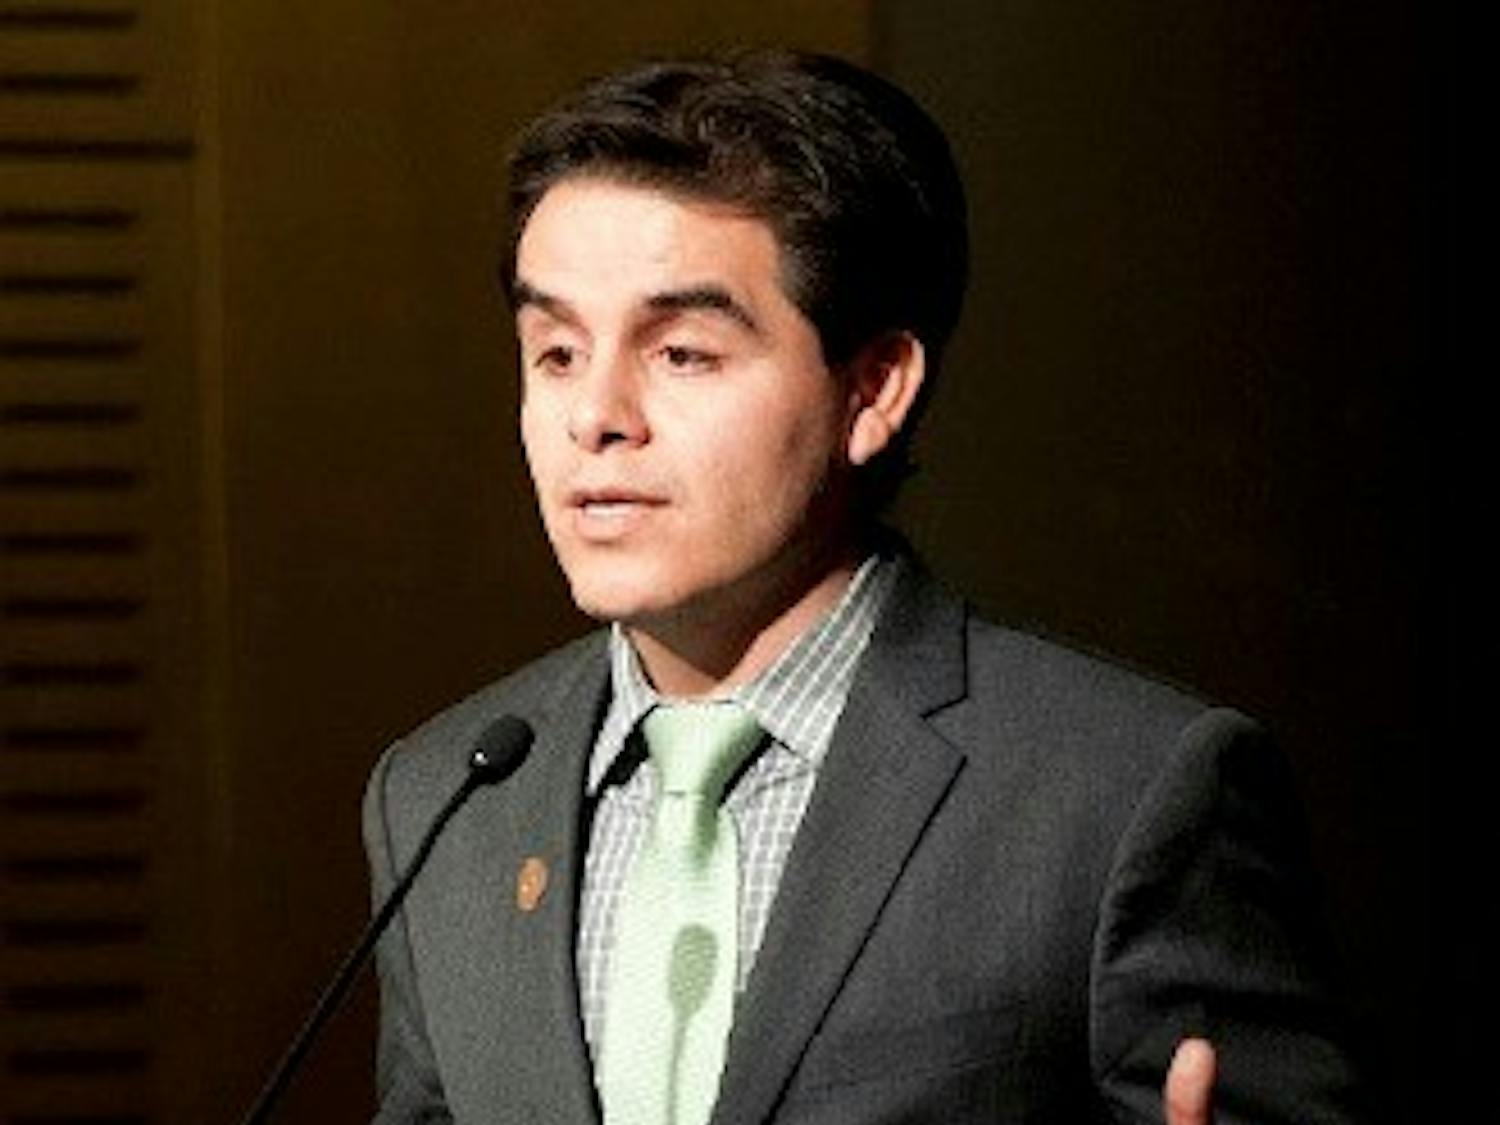 House Representative Juan Mendez (D) gives a speech on Friday, Jan. 31 for the Secular Student Alliance. Mendez is the only representative in the house who is openly atheist. He is also an ASU graduate.  (Photo by Mario Mendez)